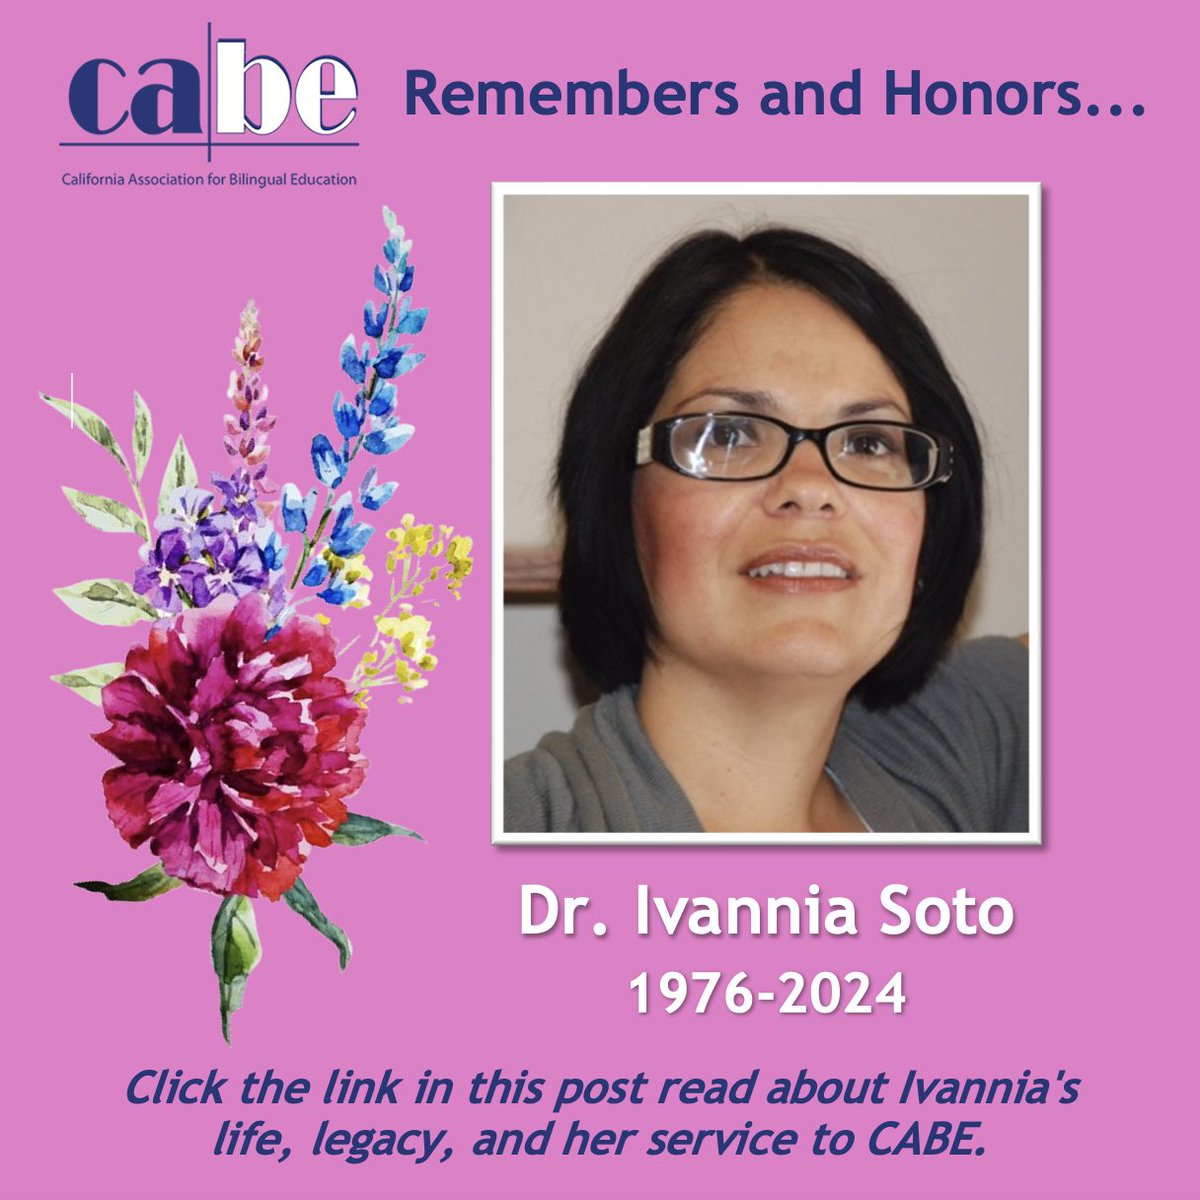 Click below to read about Dr. Ivannia Soto: gocabe.org/.../04/Ivannia…